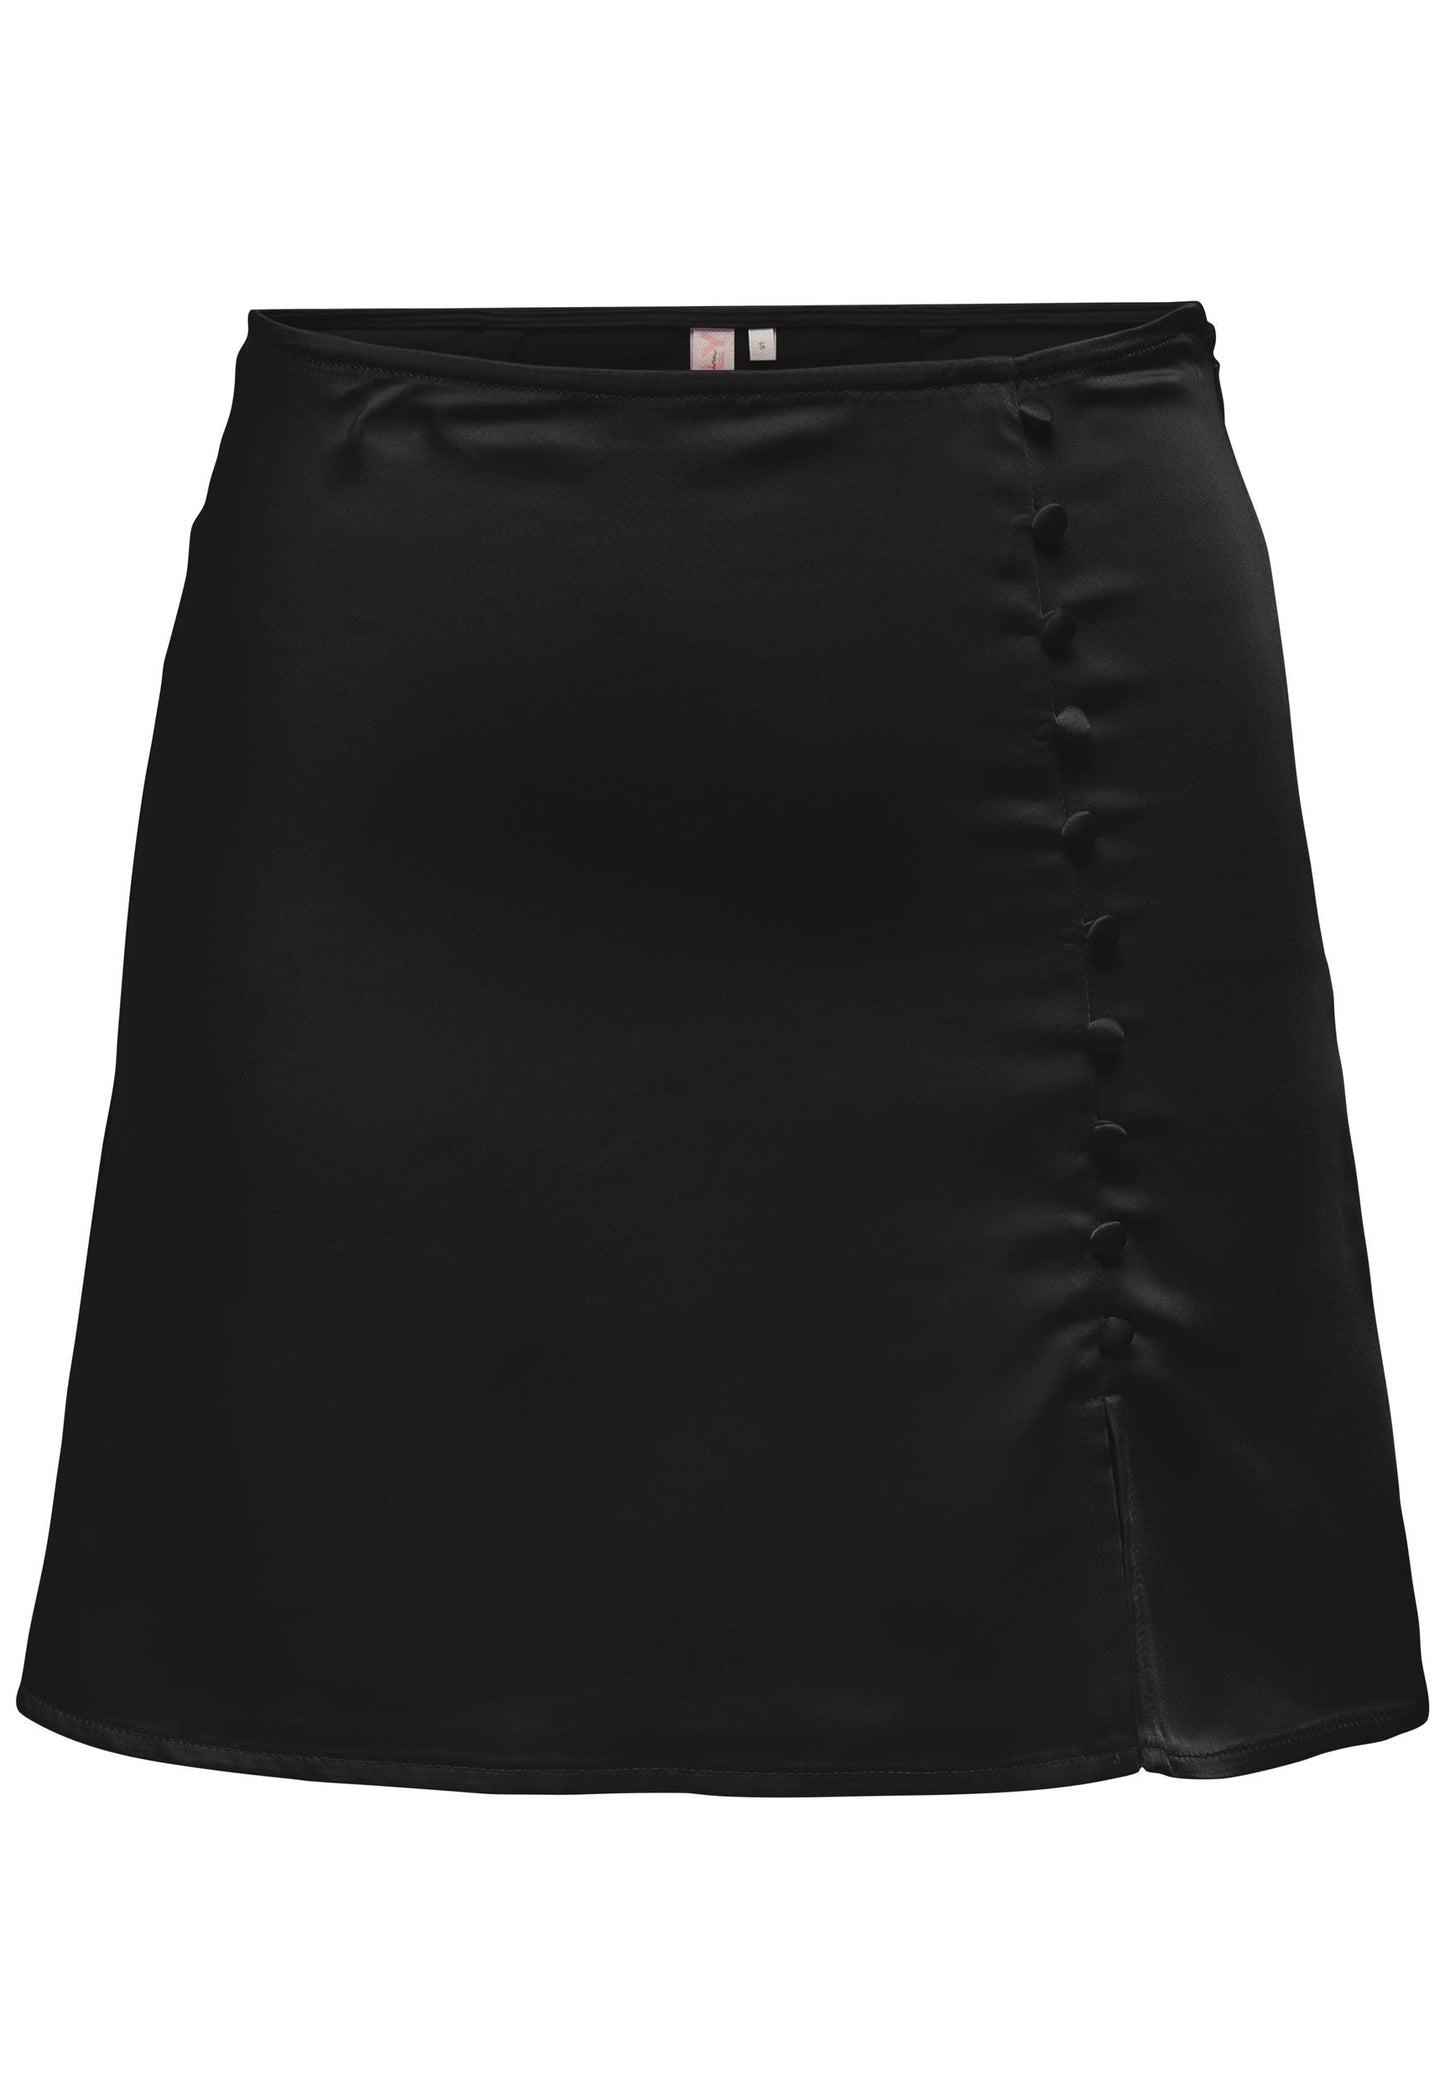 ONLY Mayra Satin Side Button Mini Skirt with Slit in Black - concretebartops